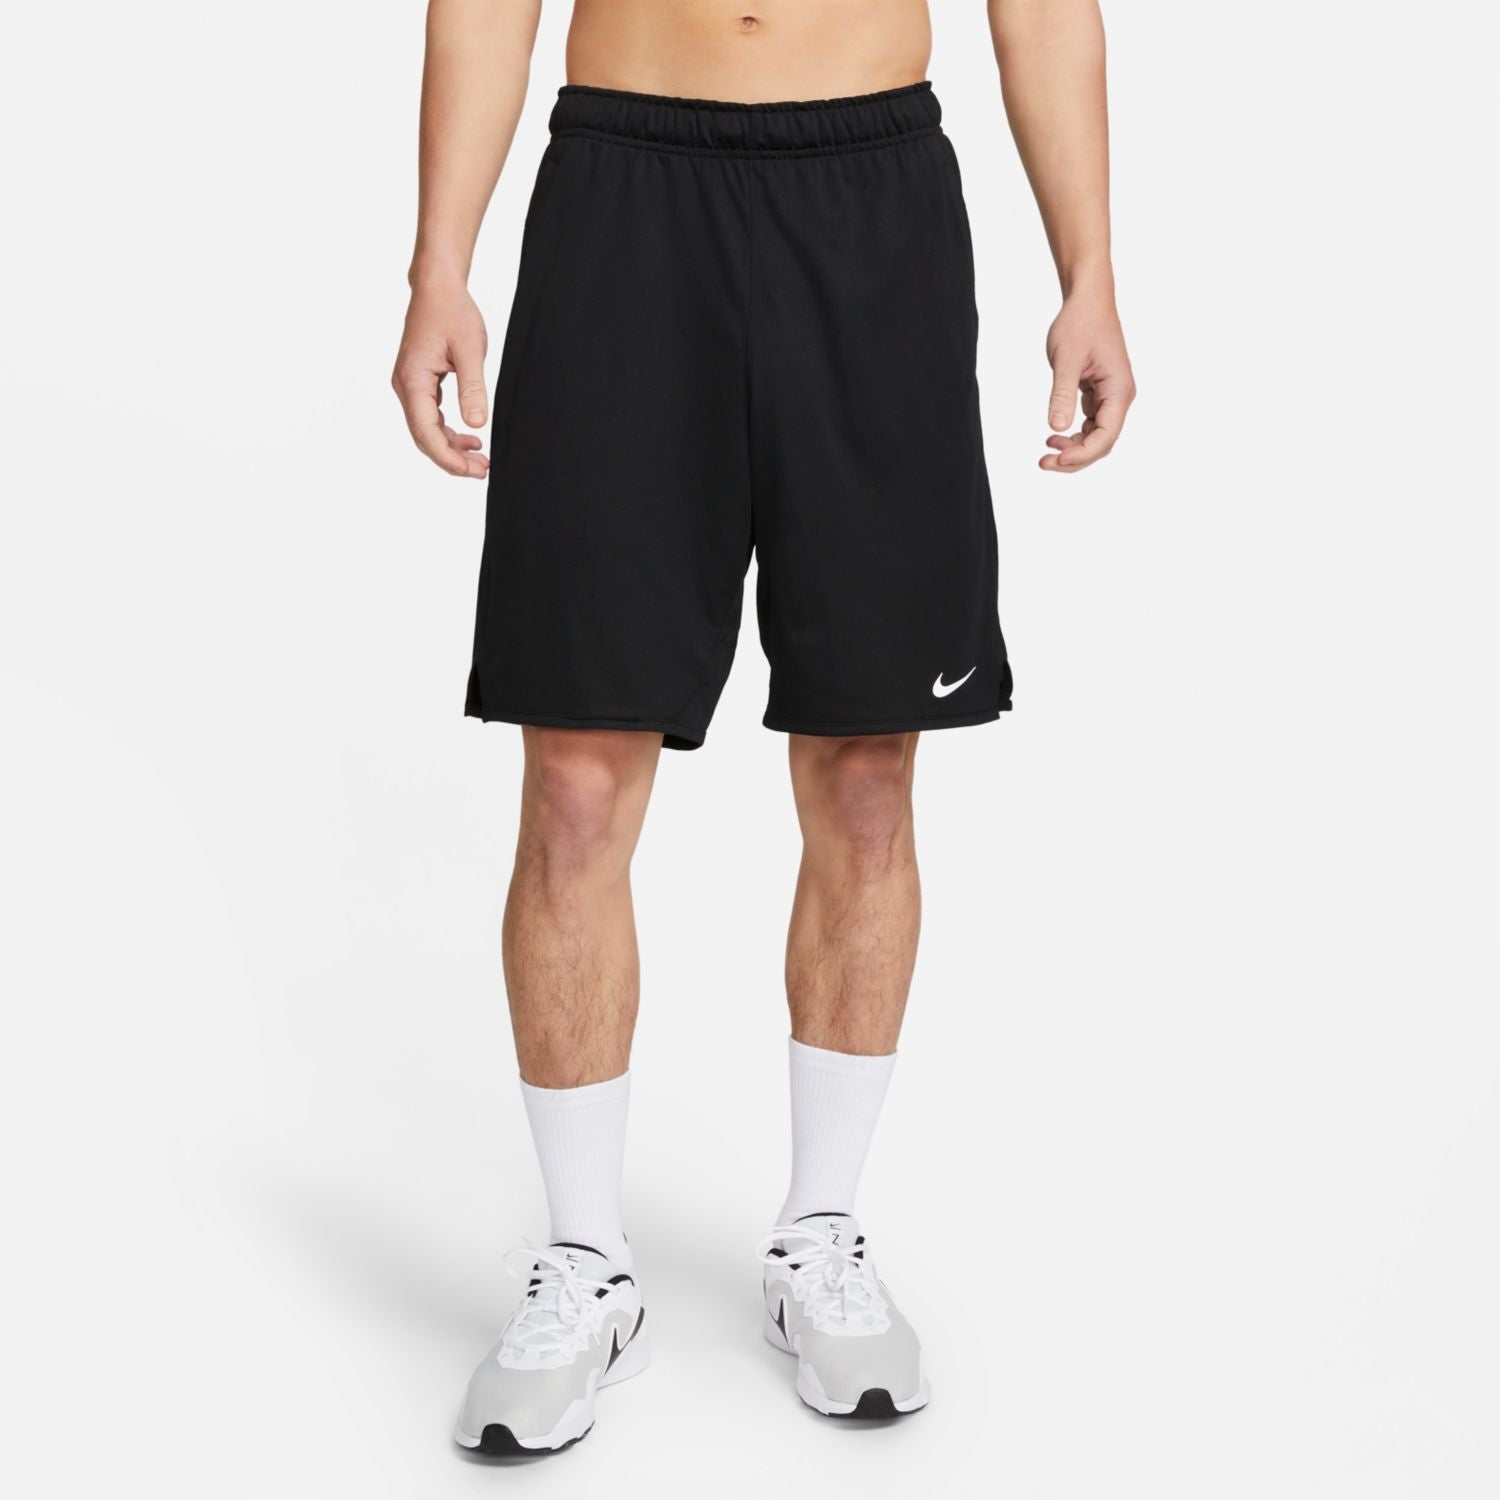 NIKE AS M NK DF TOTALTY KNT 9 IN UL DV9329-010 SHORT TRAINING (M)-1